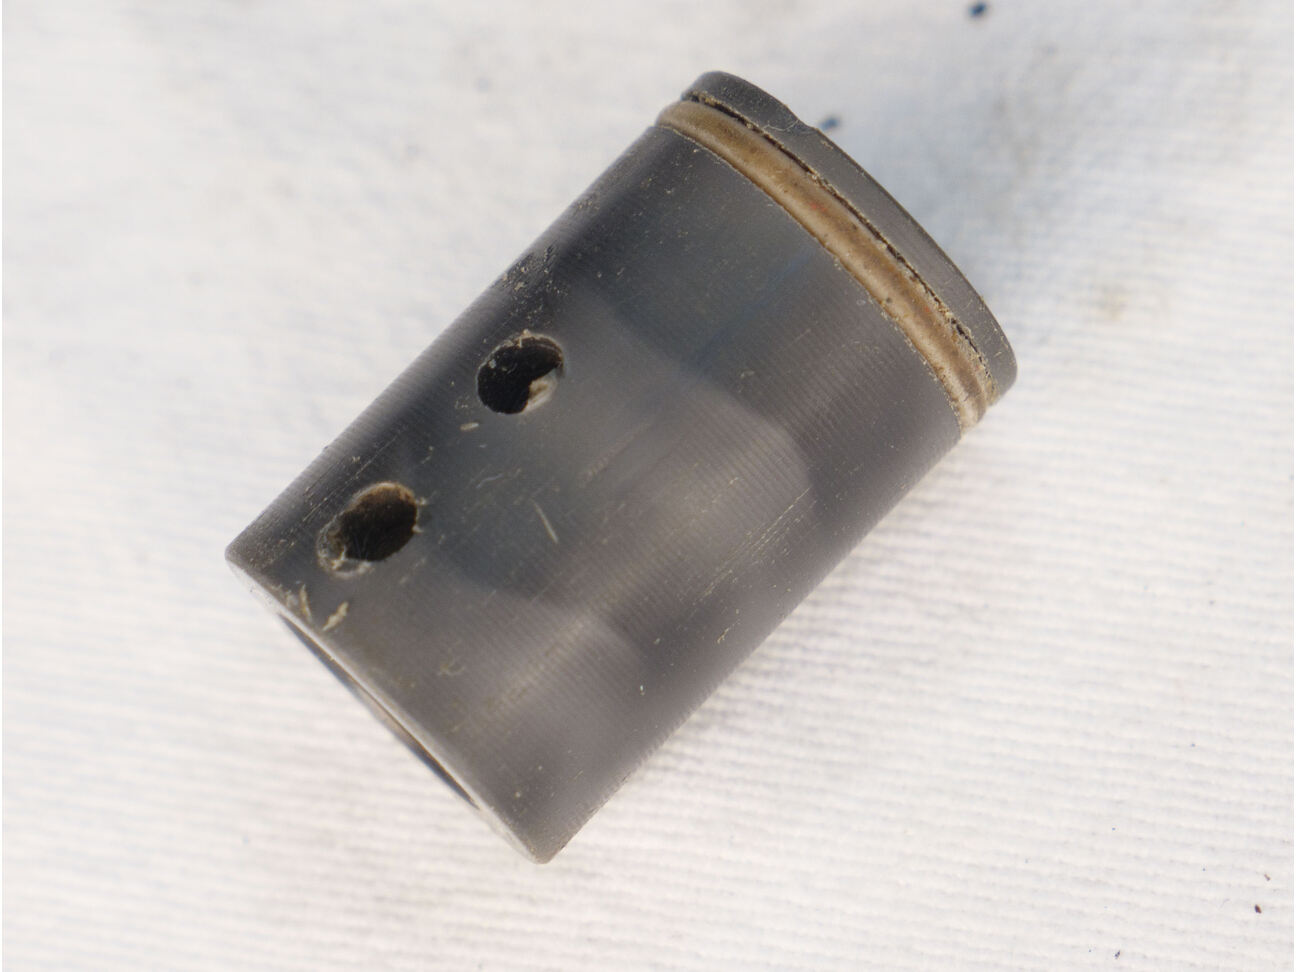 Prolite delrin bolt in used shape, two holes drilled